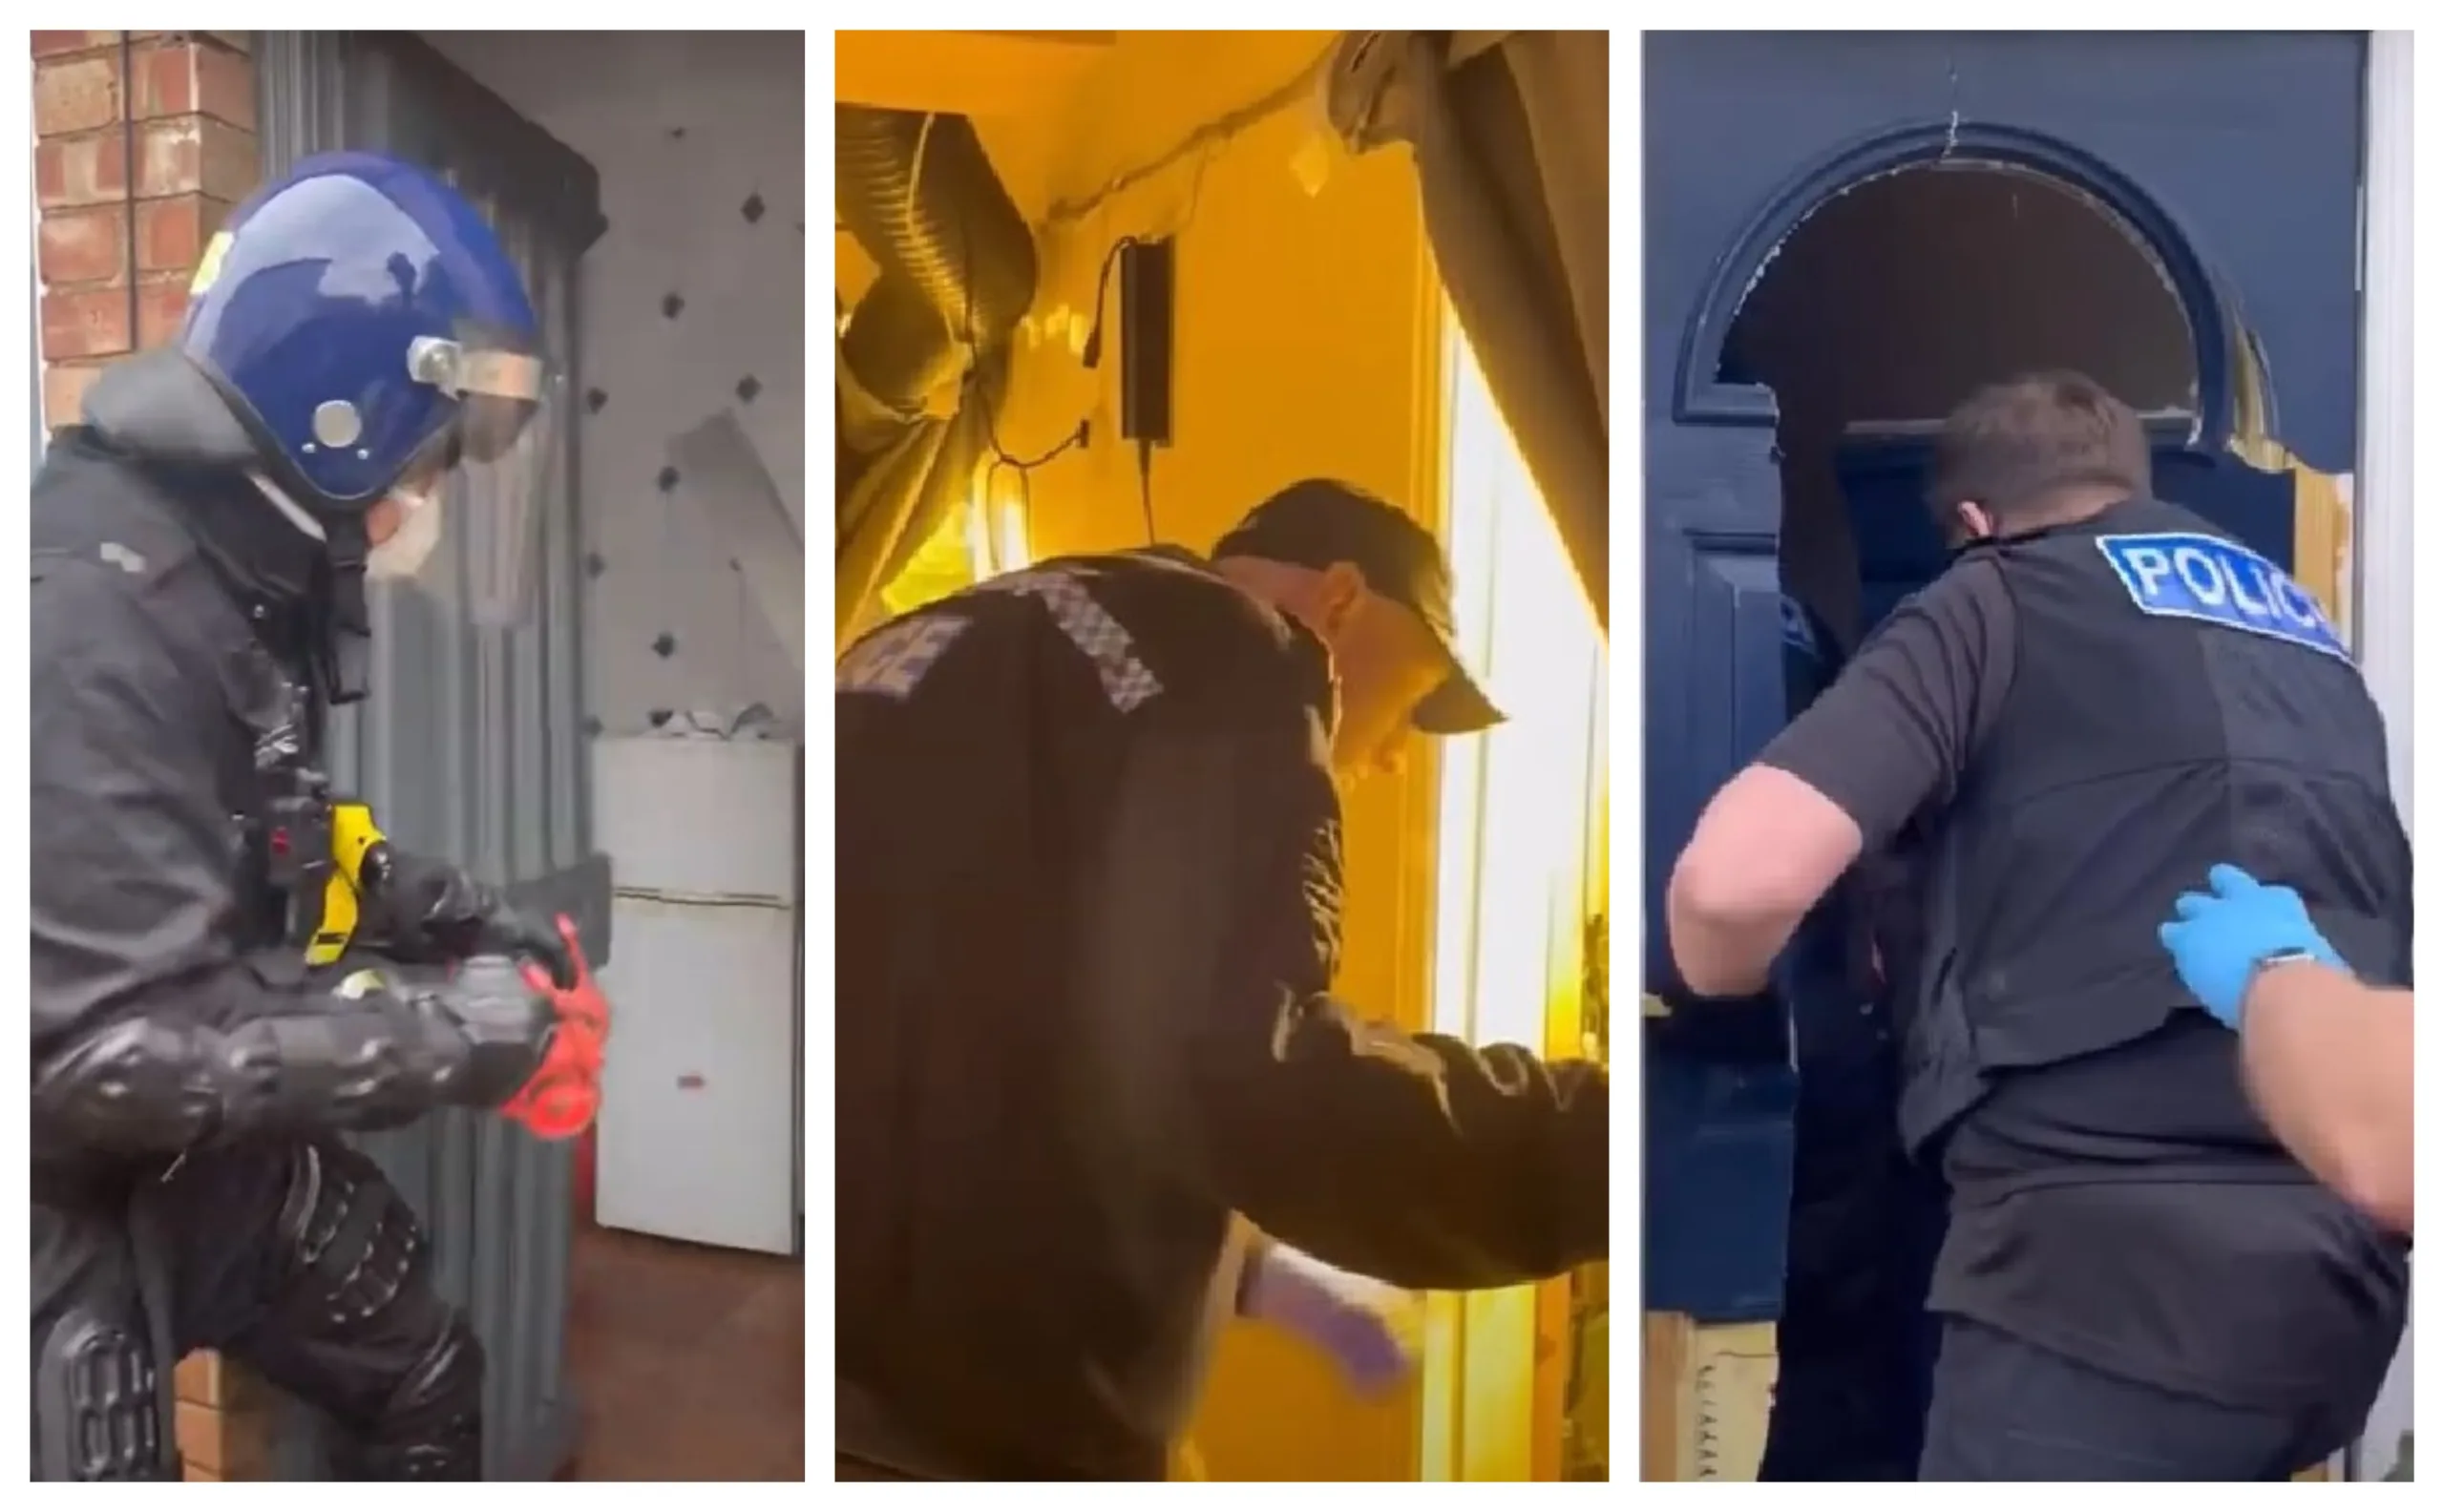 Video footage/images released by Cambridgeshire police give an indication of the scale of the operation to tackle illegal cannabis grows across the county: 19 raids in one month.